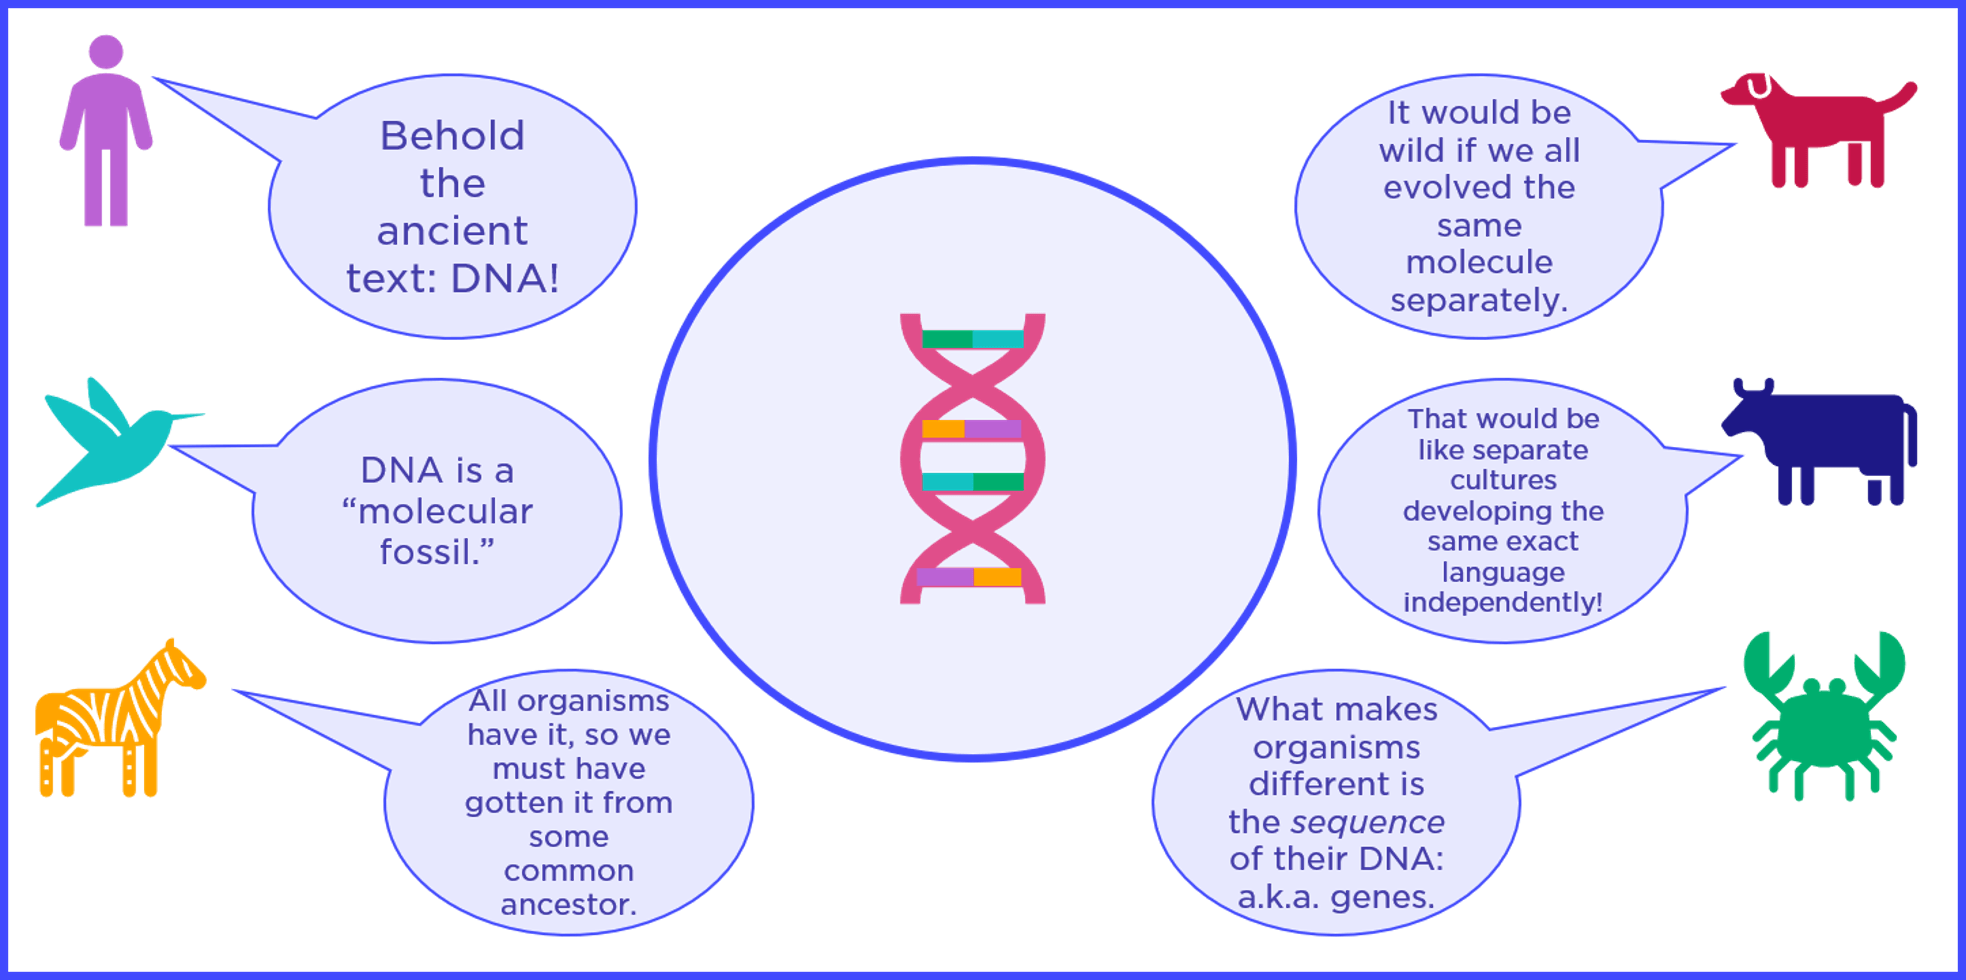 dna_is_universal.png